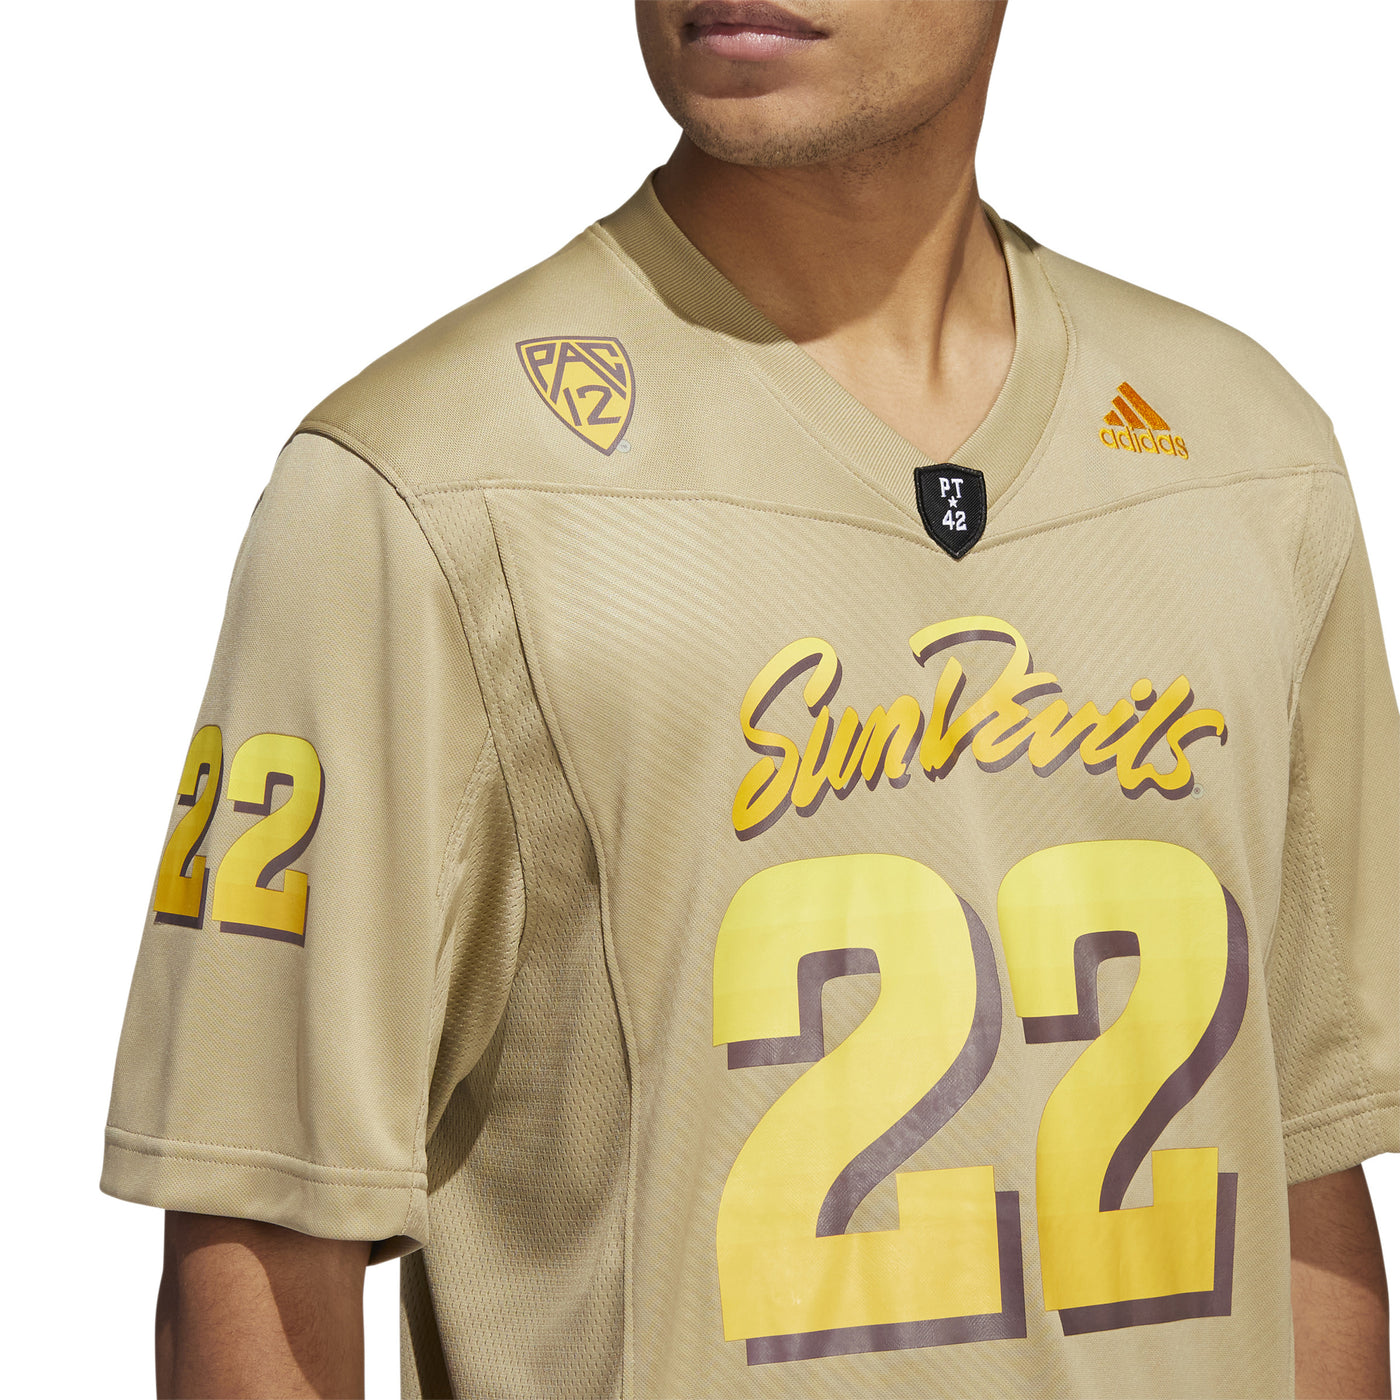 ASU tan football jersey on model. Chest close up with PAC 12 and ADIDAS logo on the collarbone.